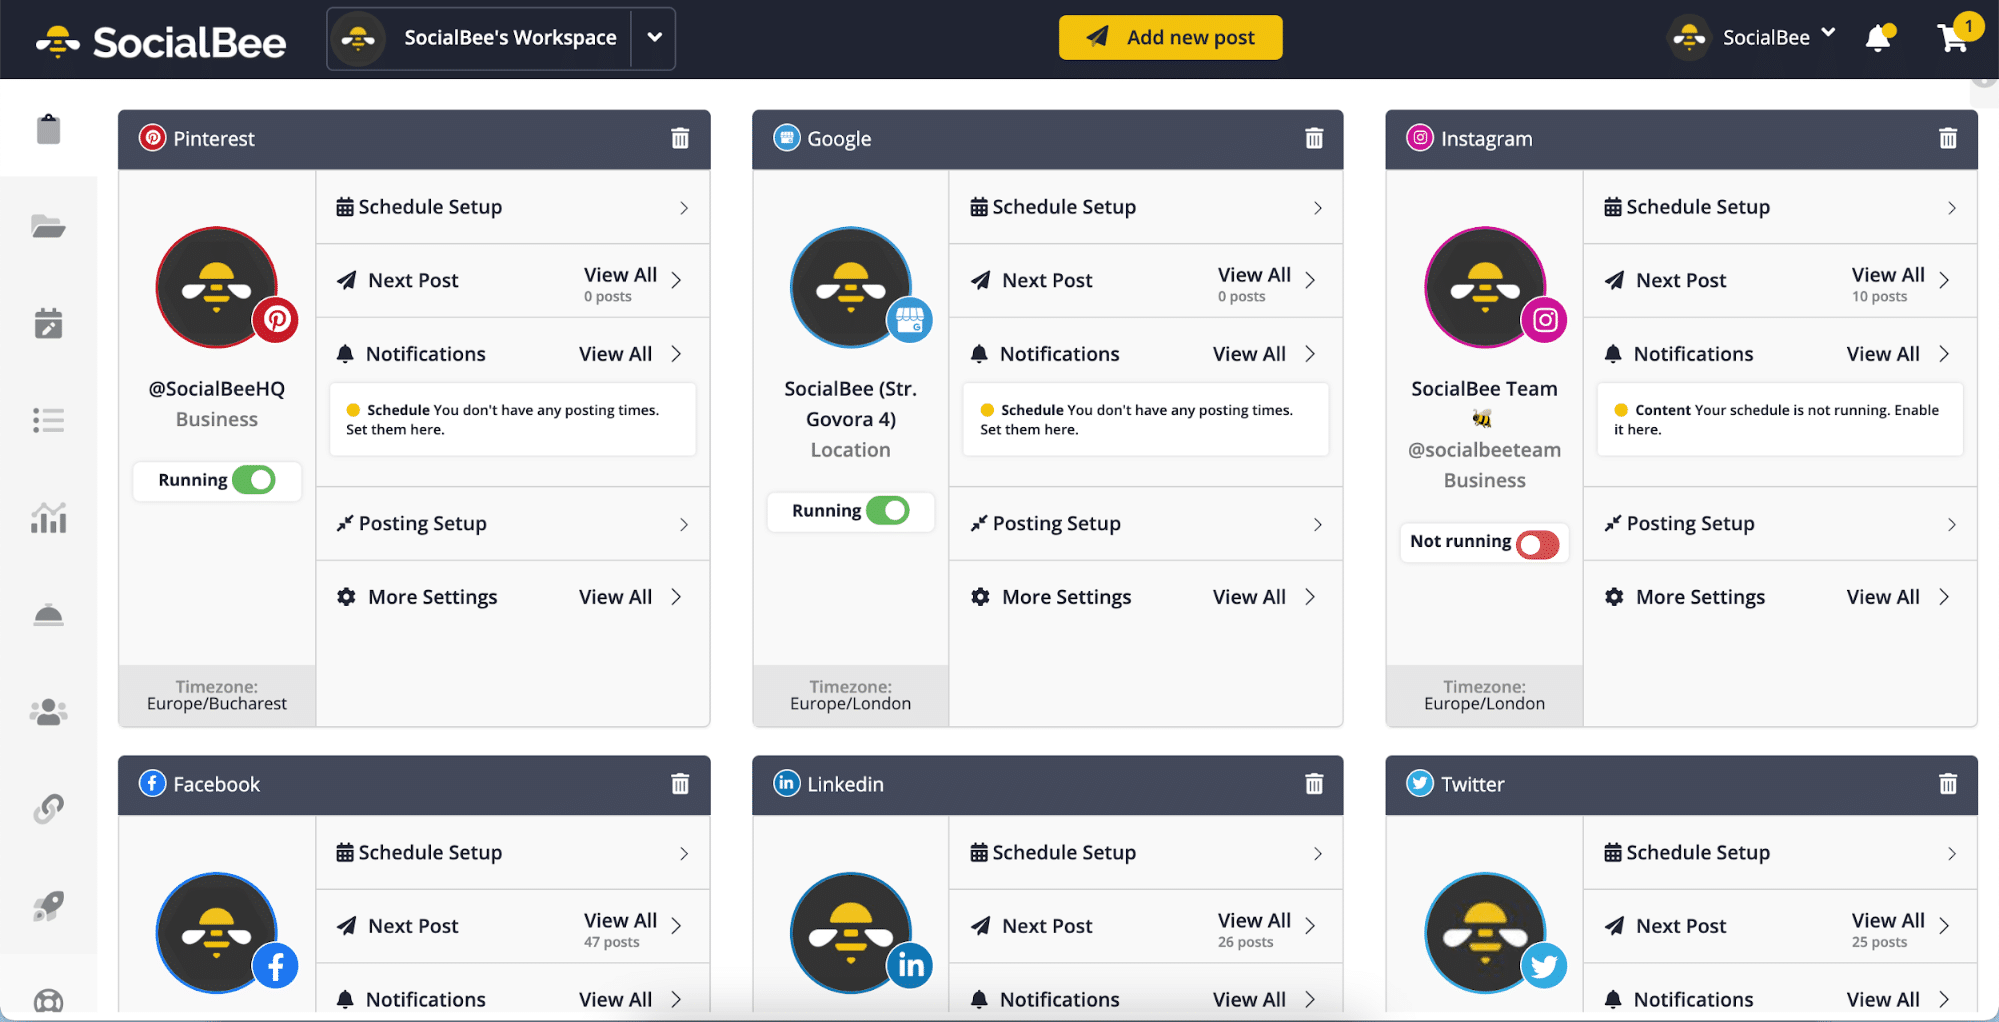 SocialBee's Dashboard with connected social media profiles